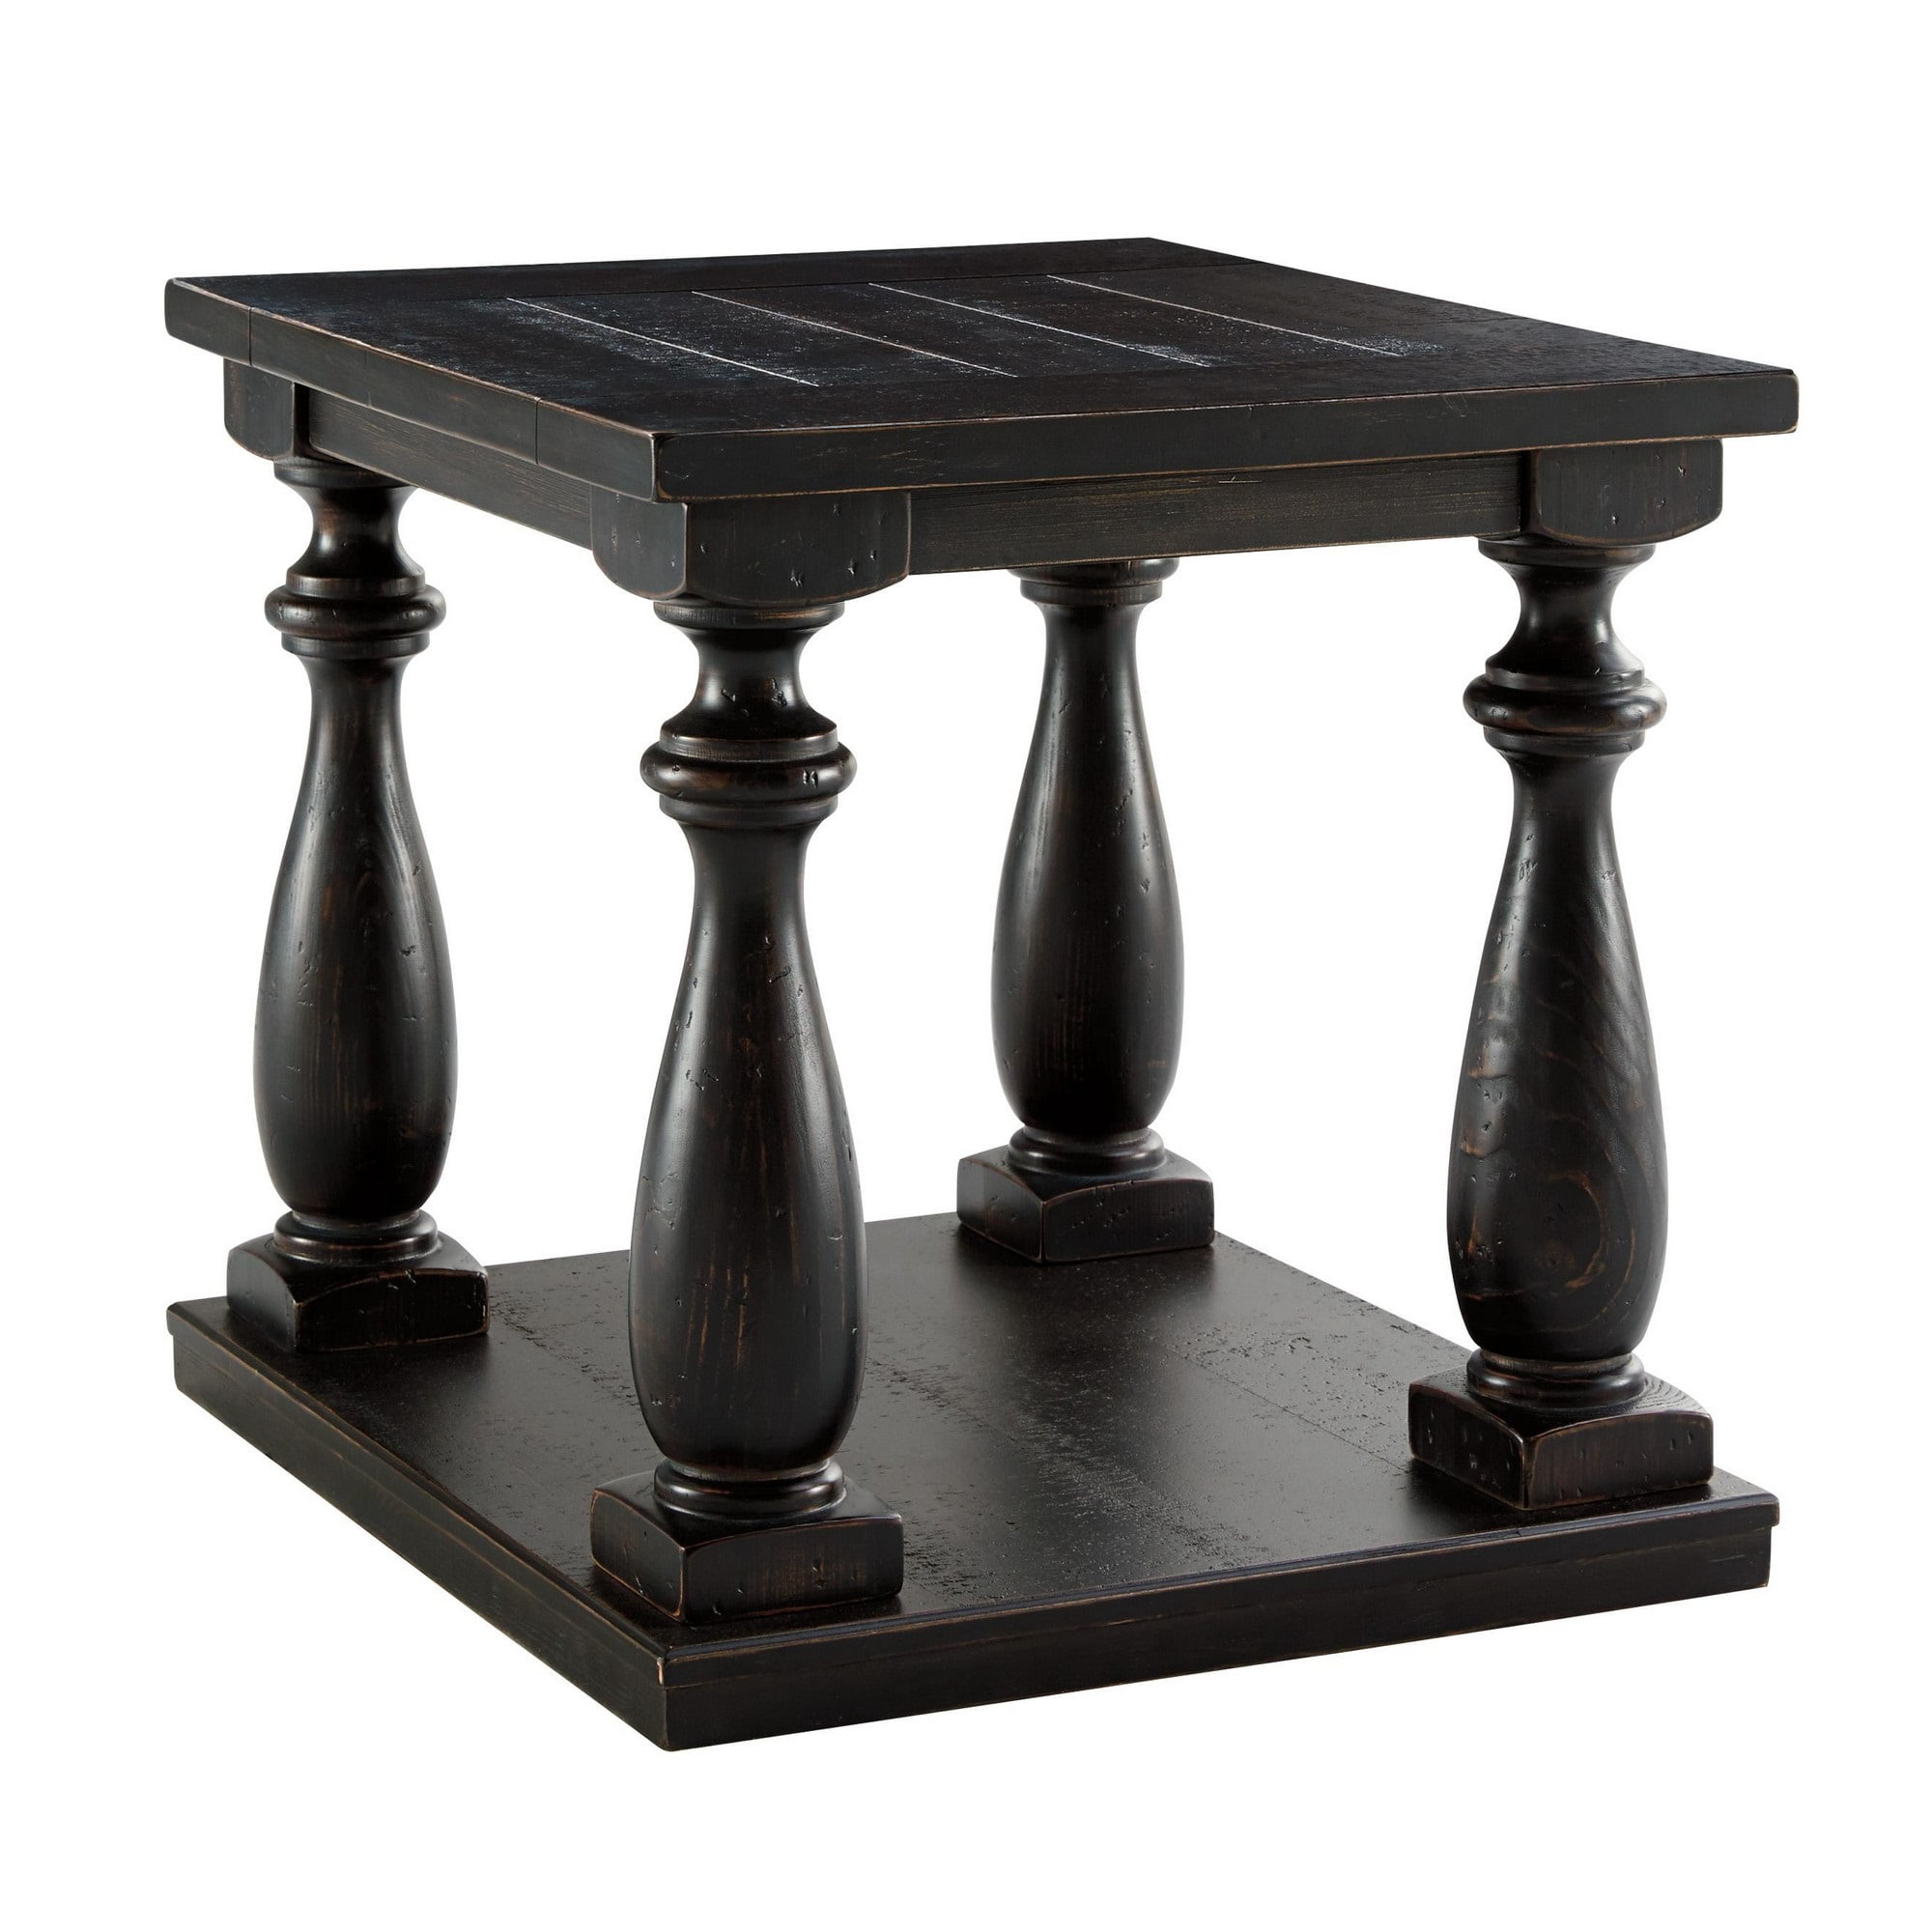 Picture of Benjara BM213331 Plank Style Wooden End Table with Turned Legs & Open Bottom Shelf - Black - 24.38 x 26.88 x 24 in.